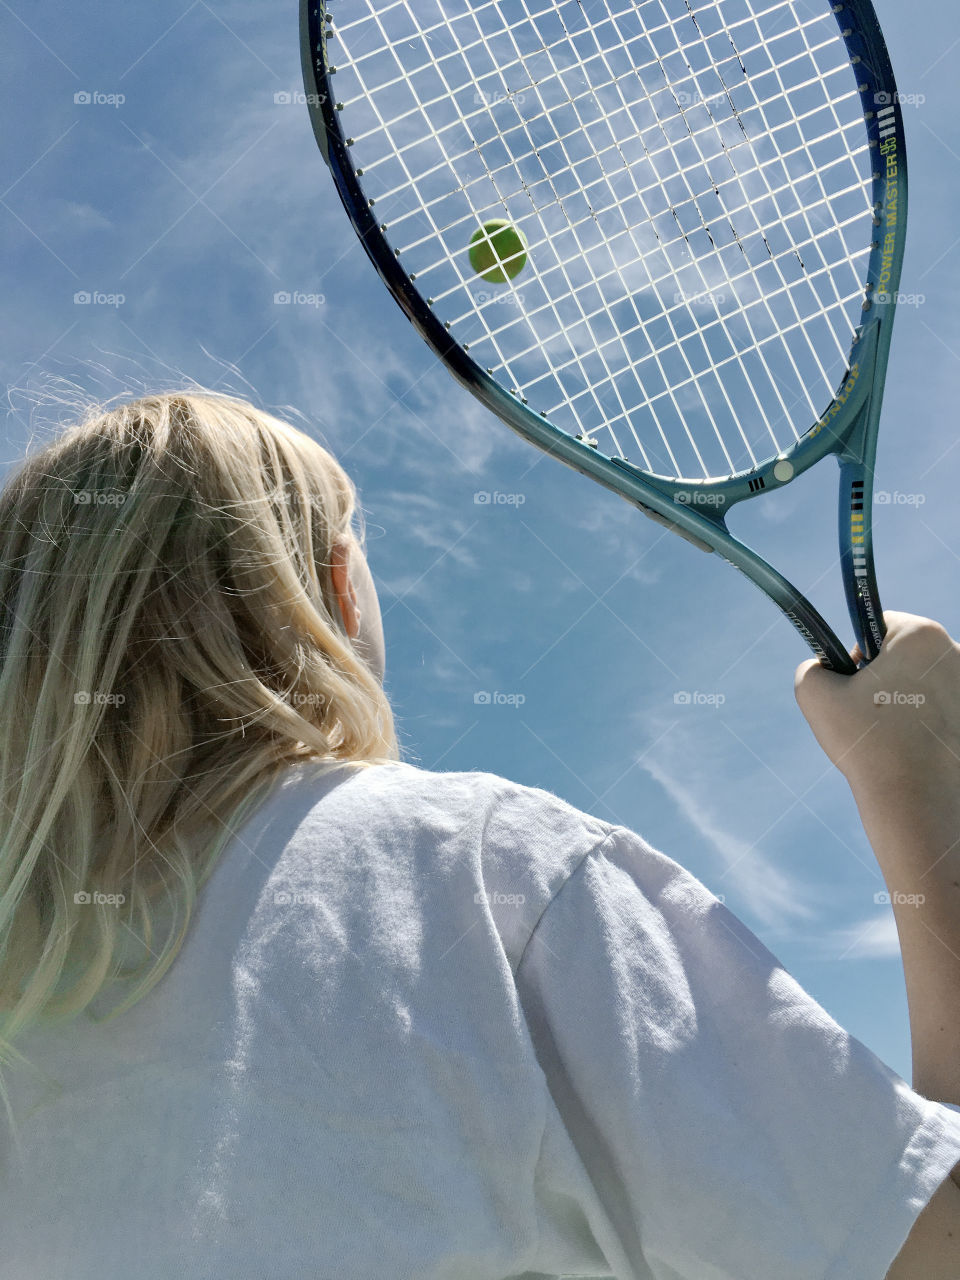 A tennis player mid-match on a sunny day 